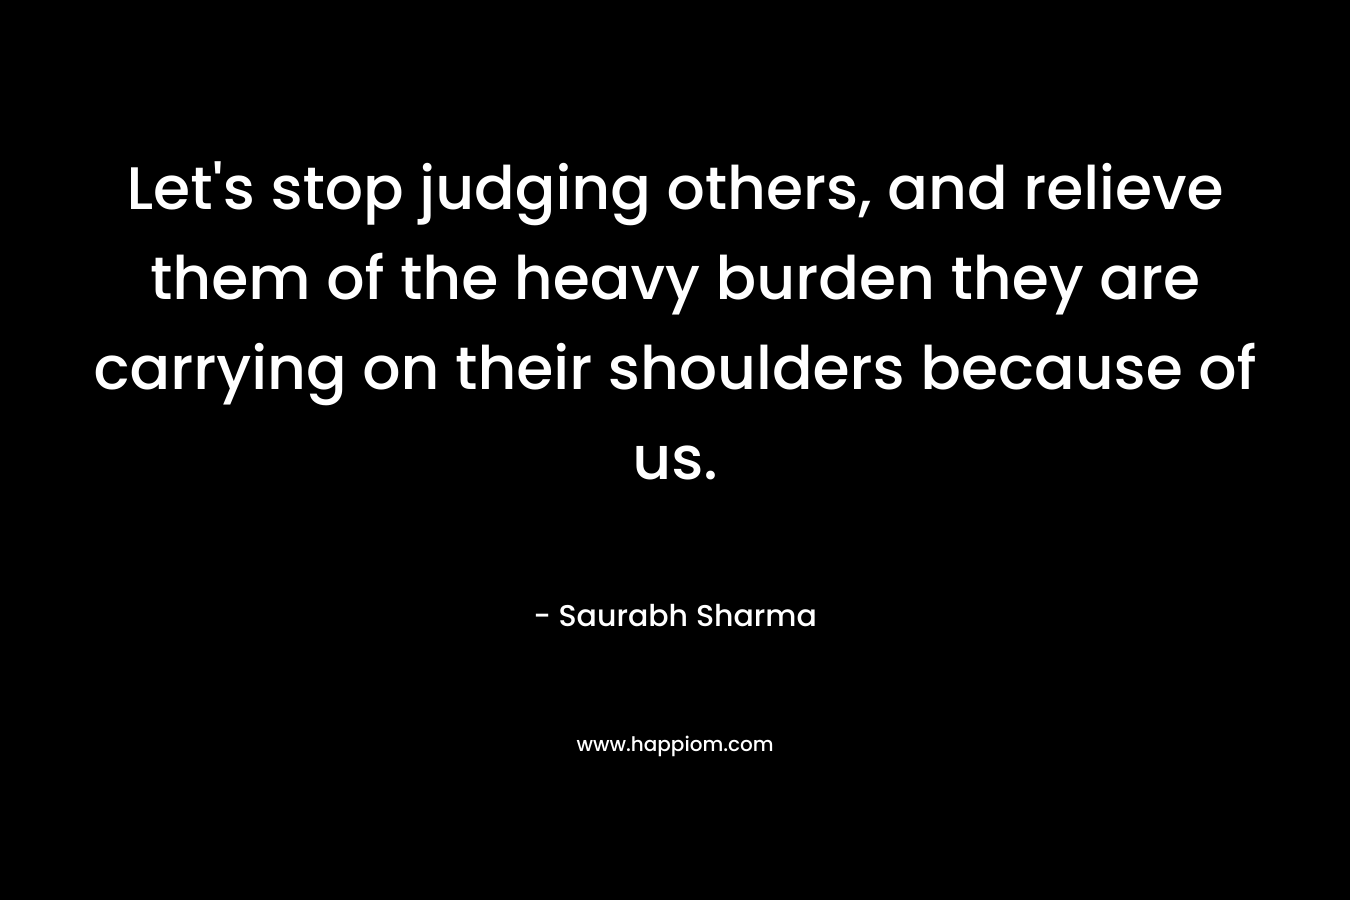 Let’s stop judging others, and relieve them of the heavy burden they are carrying on their shoulders because of us. – Saurabh Sharma